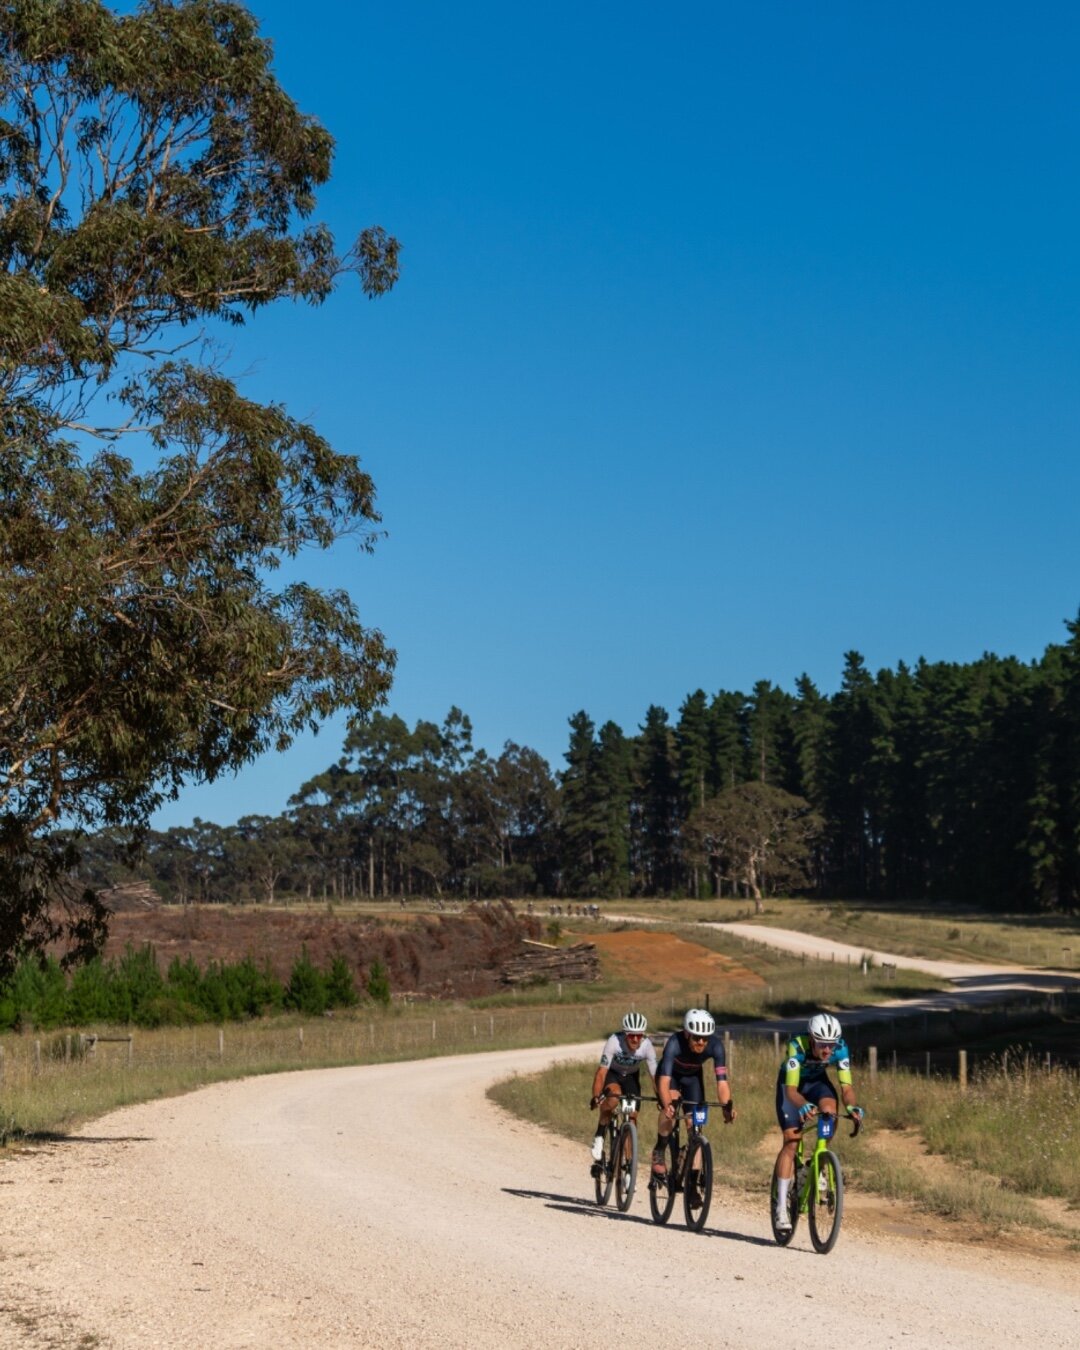 If you raced with us or have been tuning  in, you already know how incredible the gravel riding is here in South Australia are, but tell us something we don't know: where is an unexpected gravel destination you&rsquo;ve discovered in another part of 